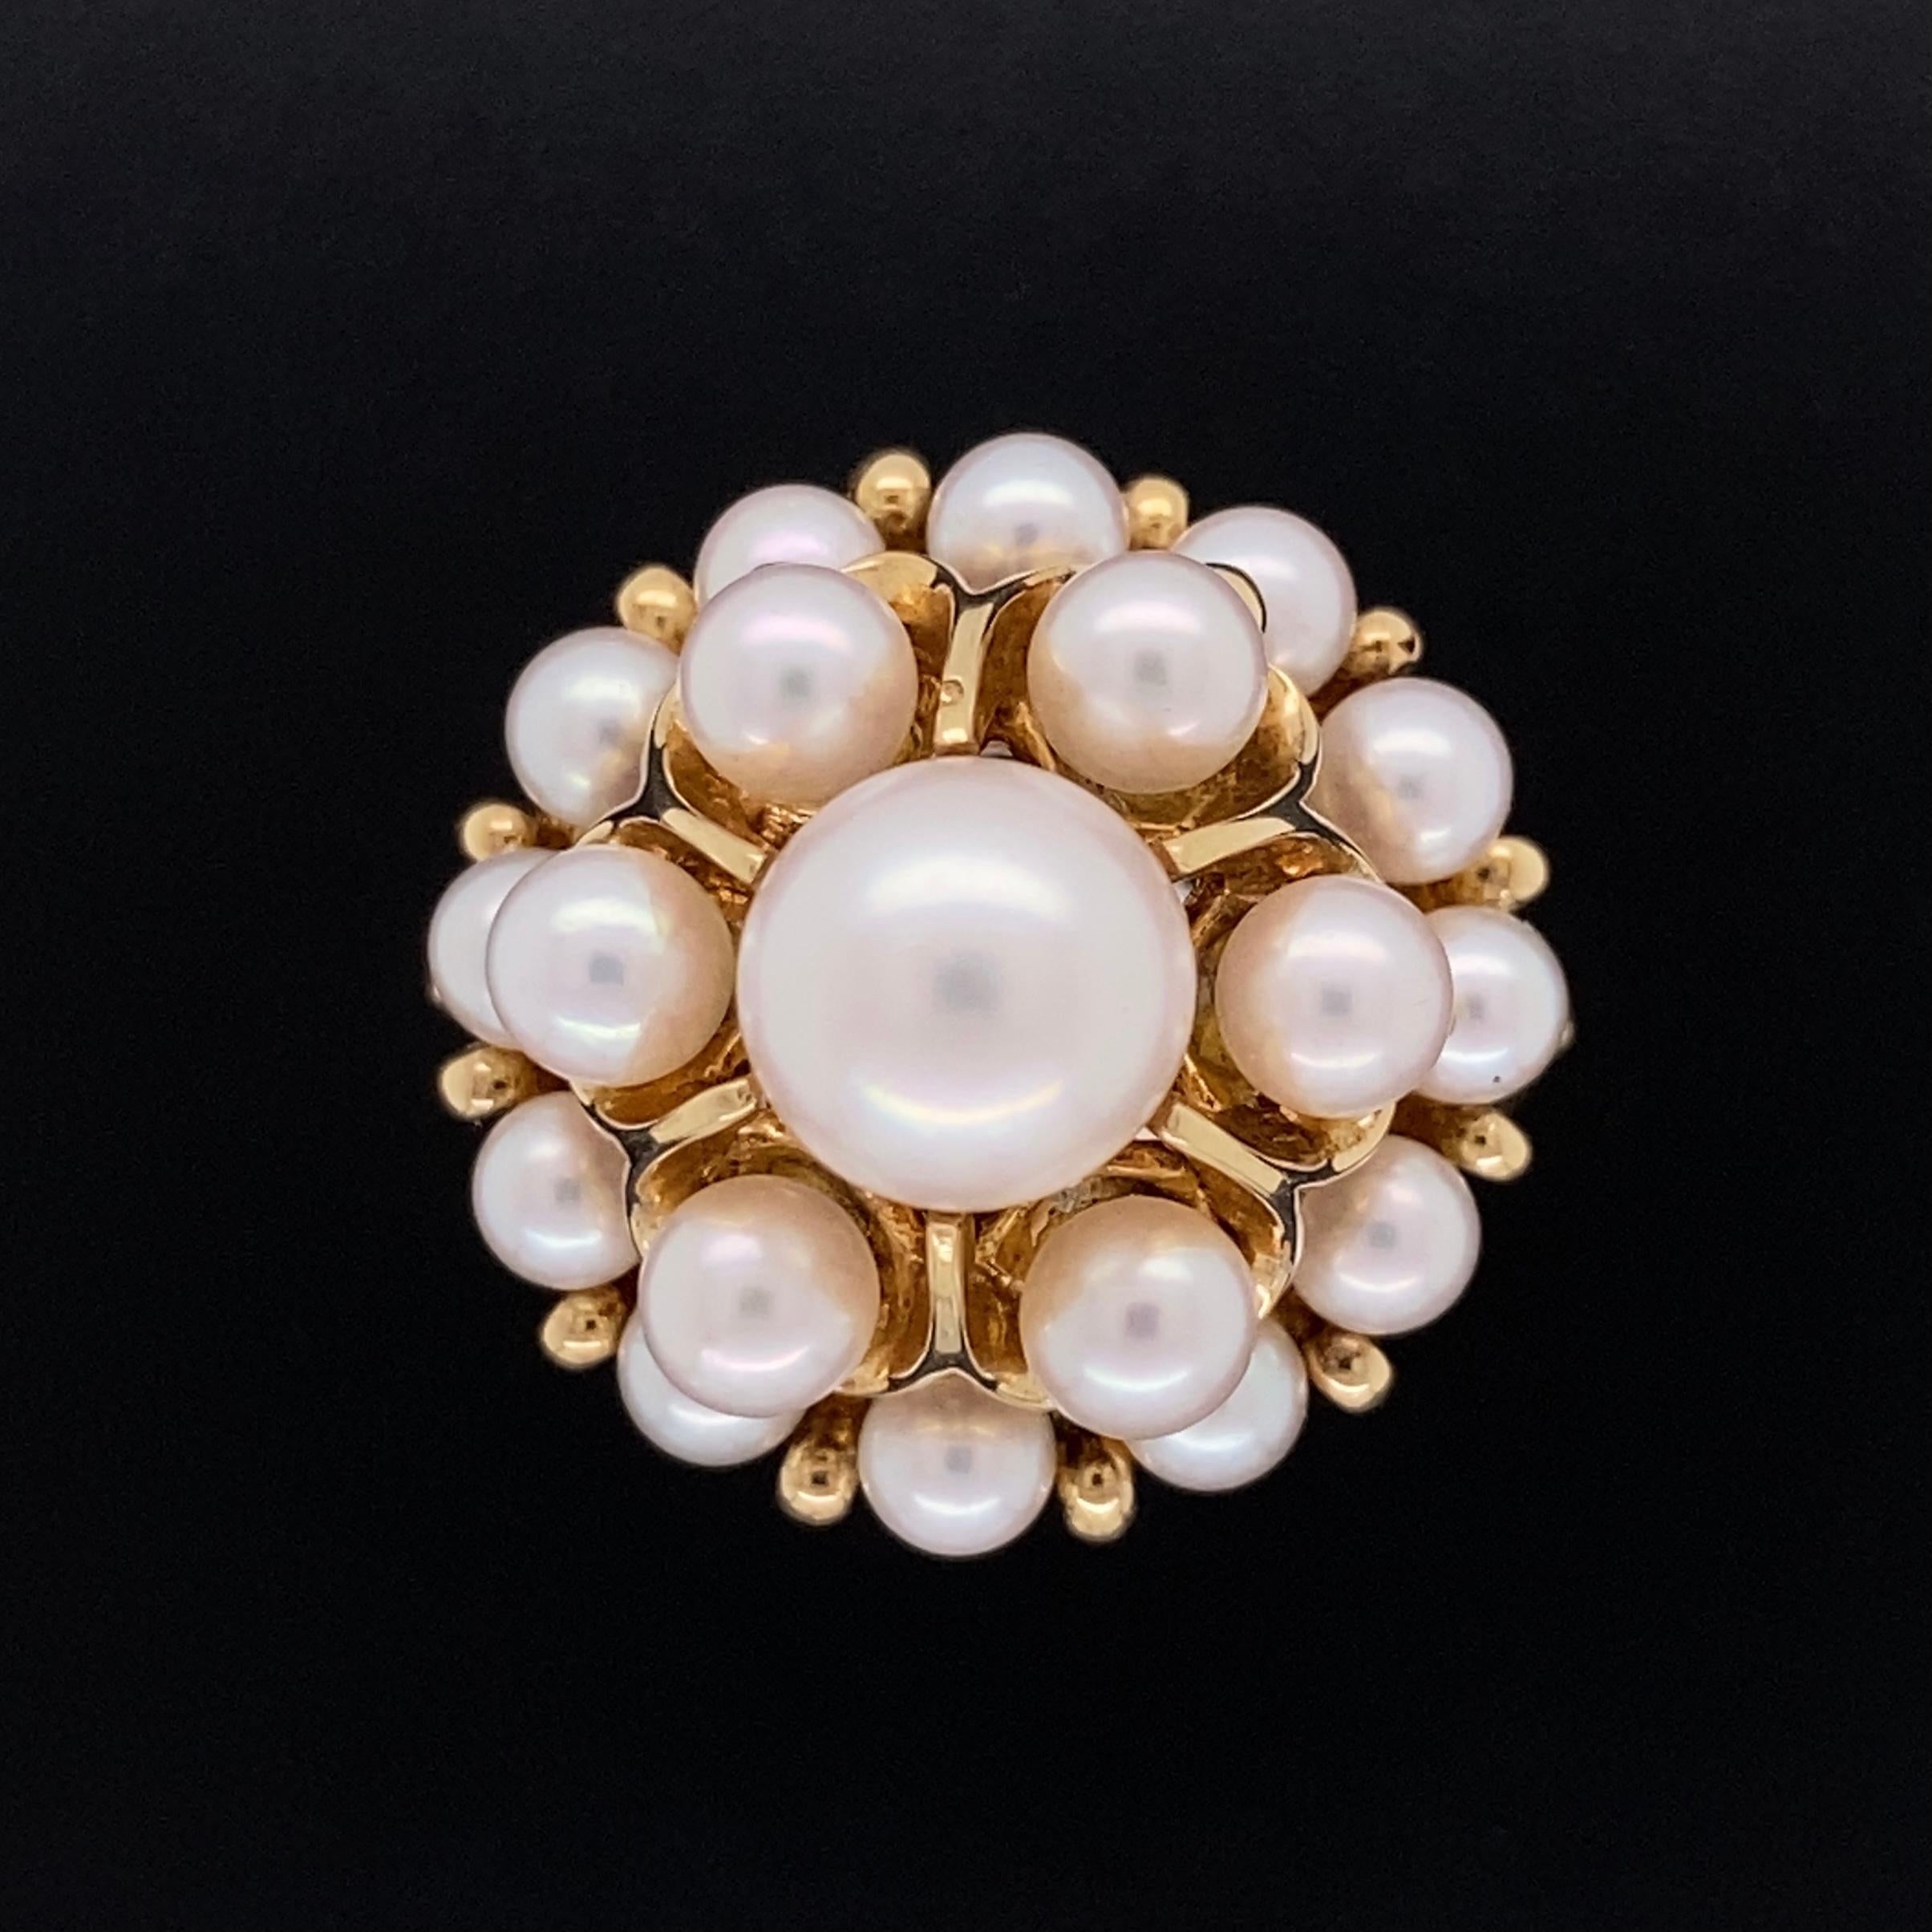 Simply Beautiful and finely detailed Cocktail Cluster Ring, set with 19 Mikimoto Pearls, each measuring approx. 3.4-7mm. Approx. dimensions 0.77”w x 0.73”h x 1.26”d. Hand crafted in 14 Karat Yellow Gold. The ring epitomizes vintage charm, taking you